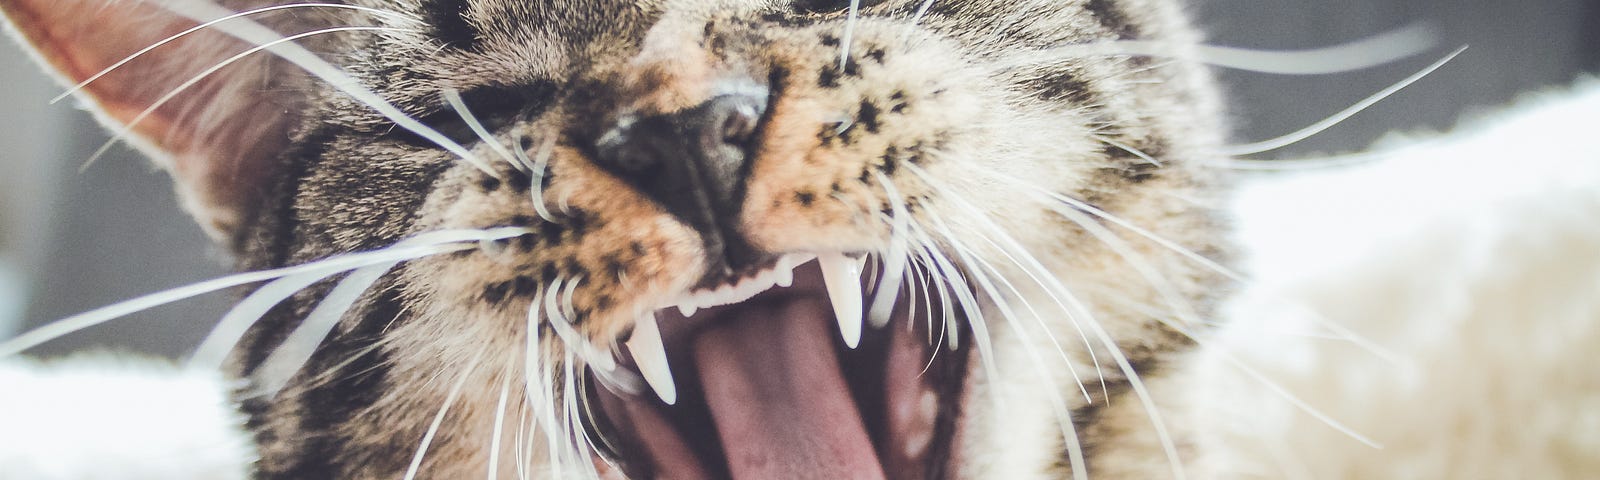 brown tabby cat yawning widely, showing all their teeth